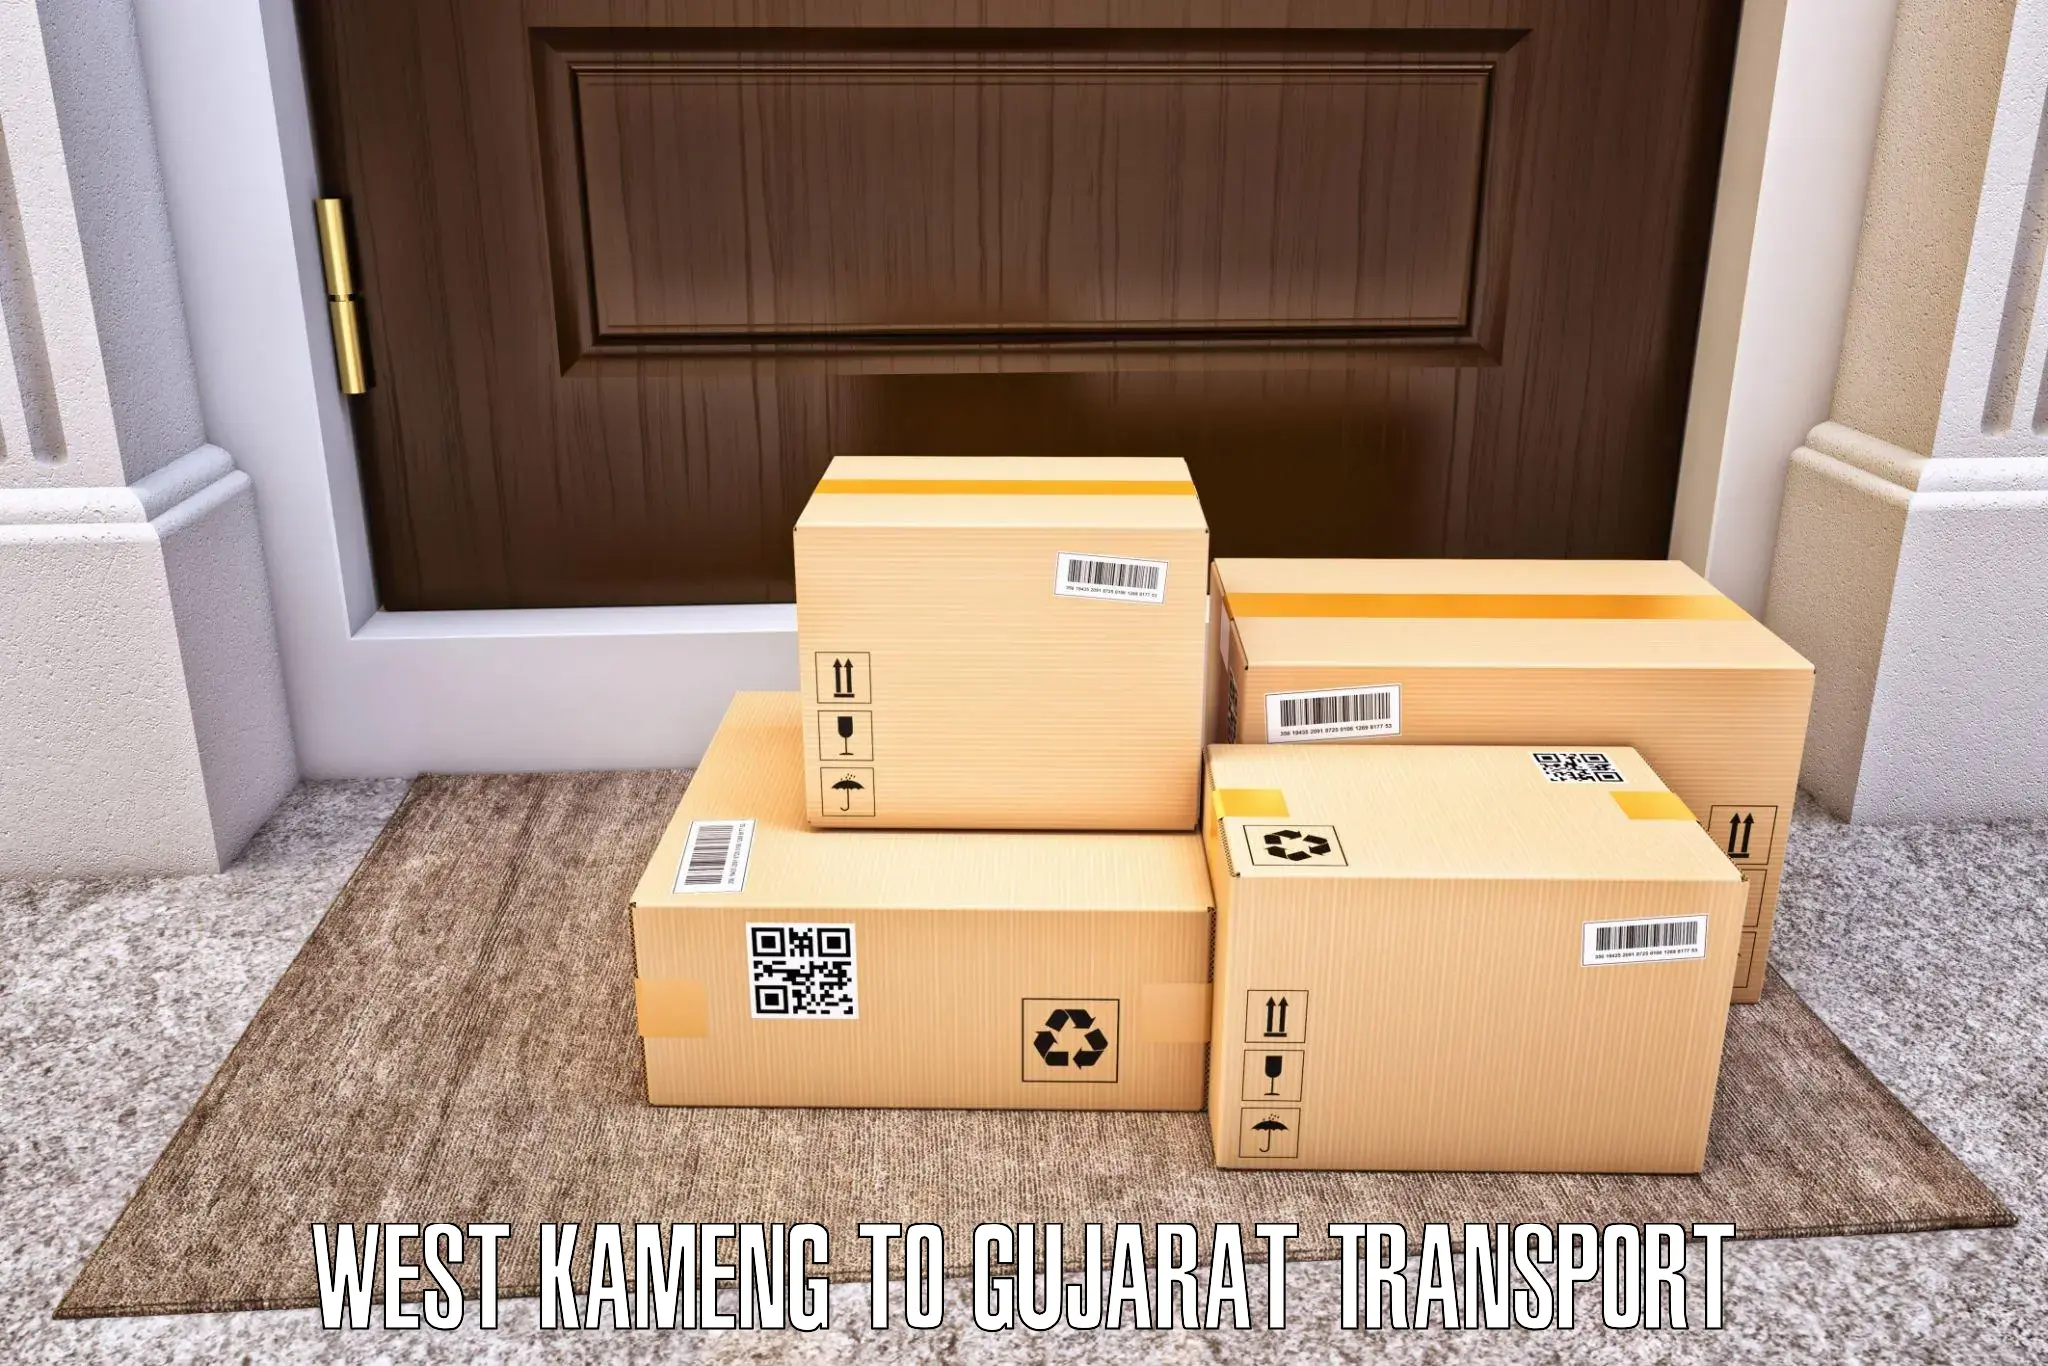 Express transport services West Kameng to Dhasa